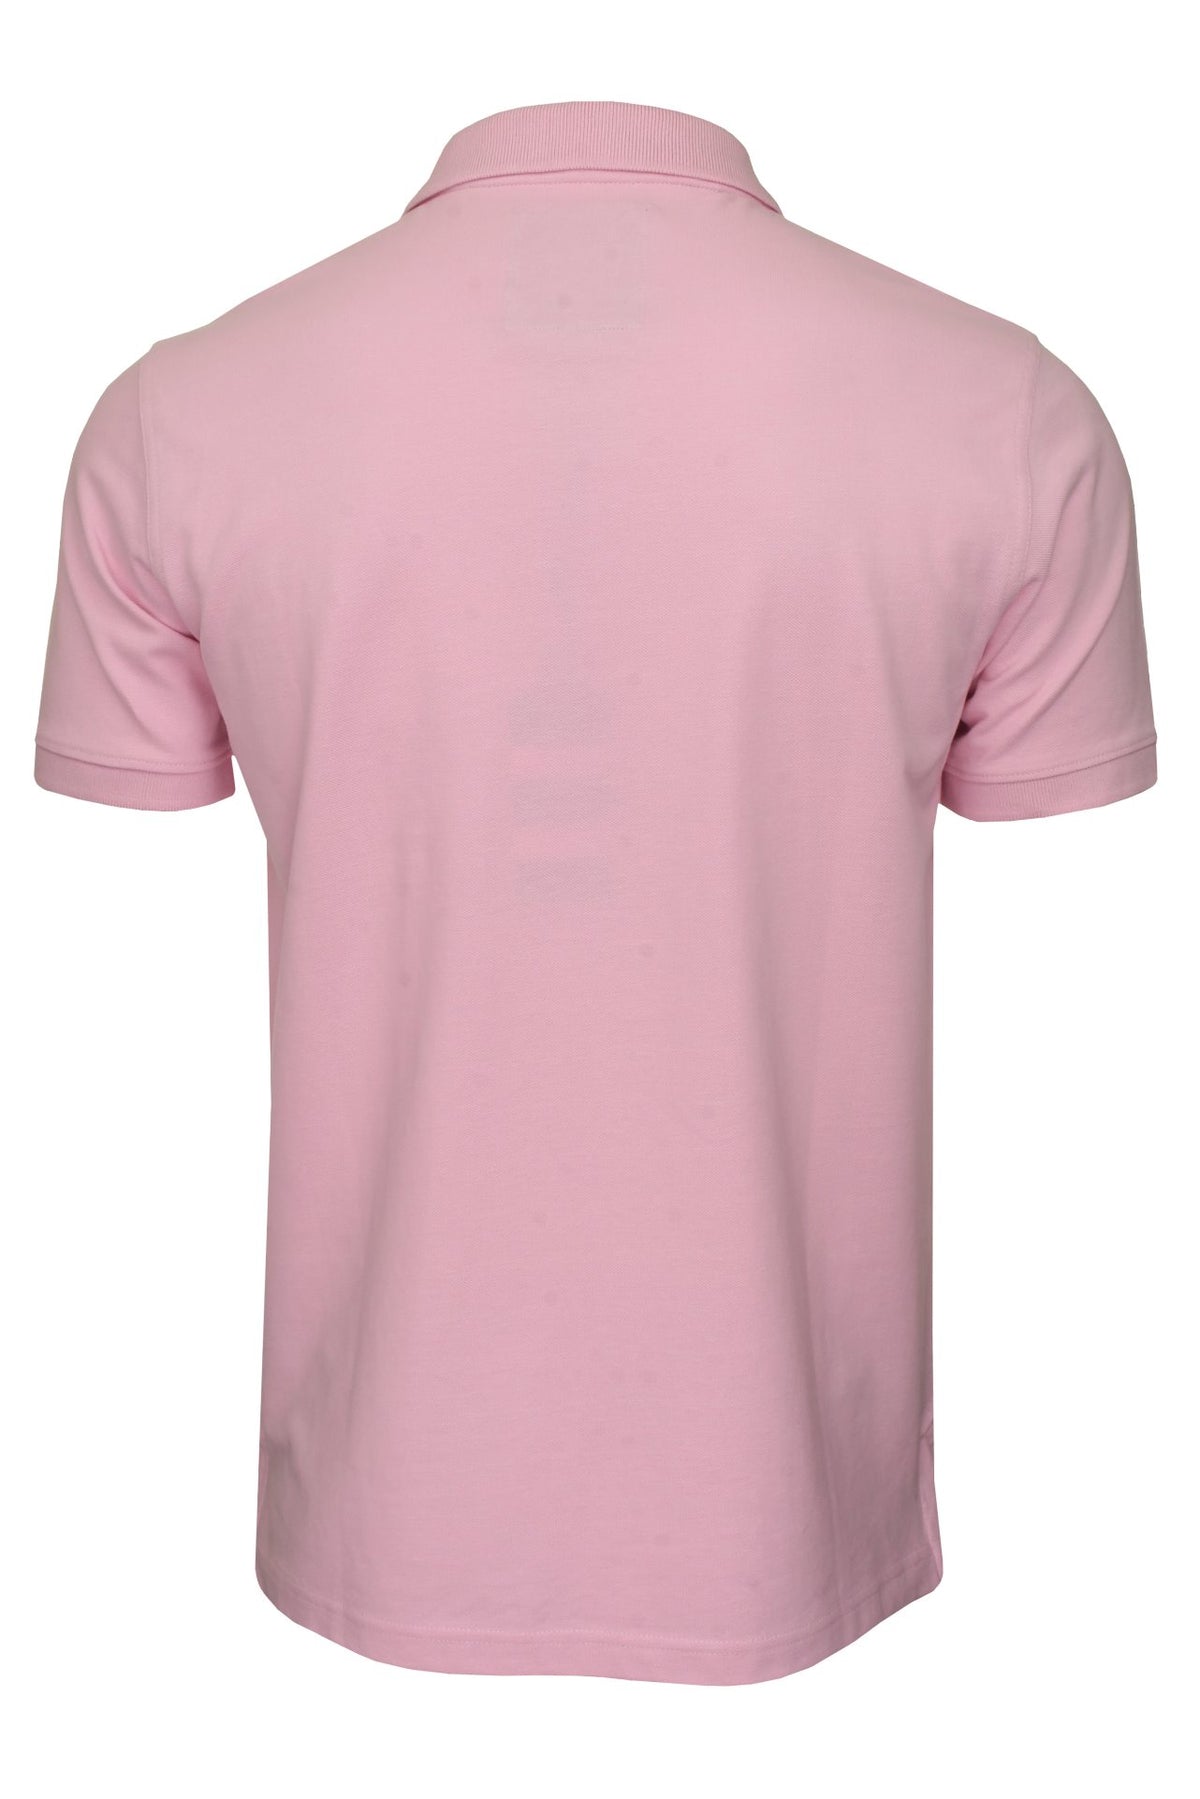 Crew Clothing Mens Pique Polo Shirt 'Classic Pique Polo' - Short Sleeved, 03, Mke002, Classic Pink